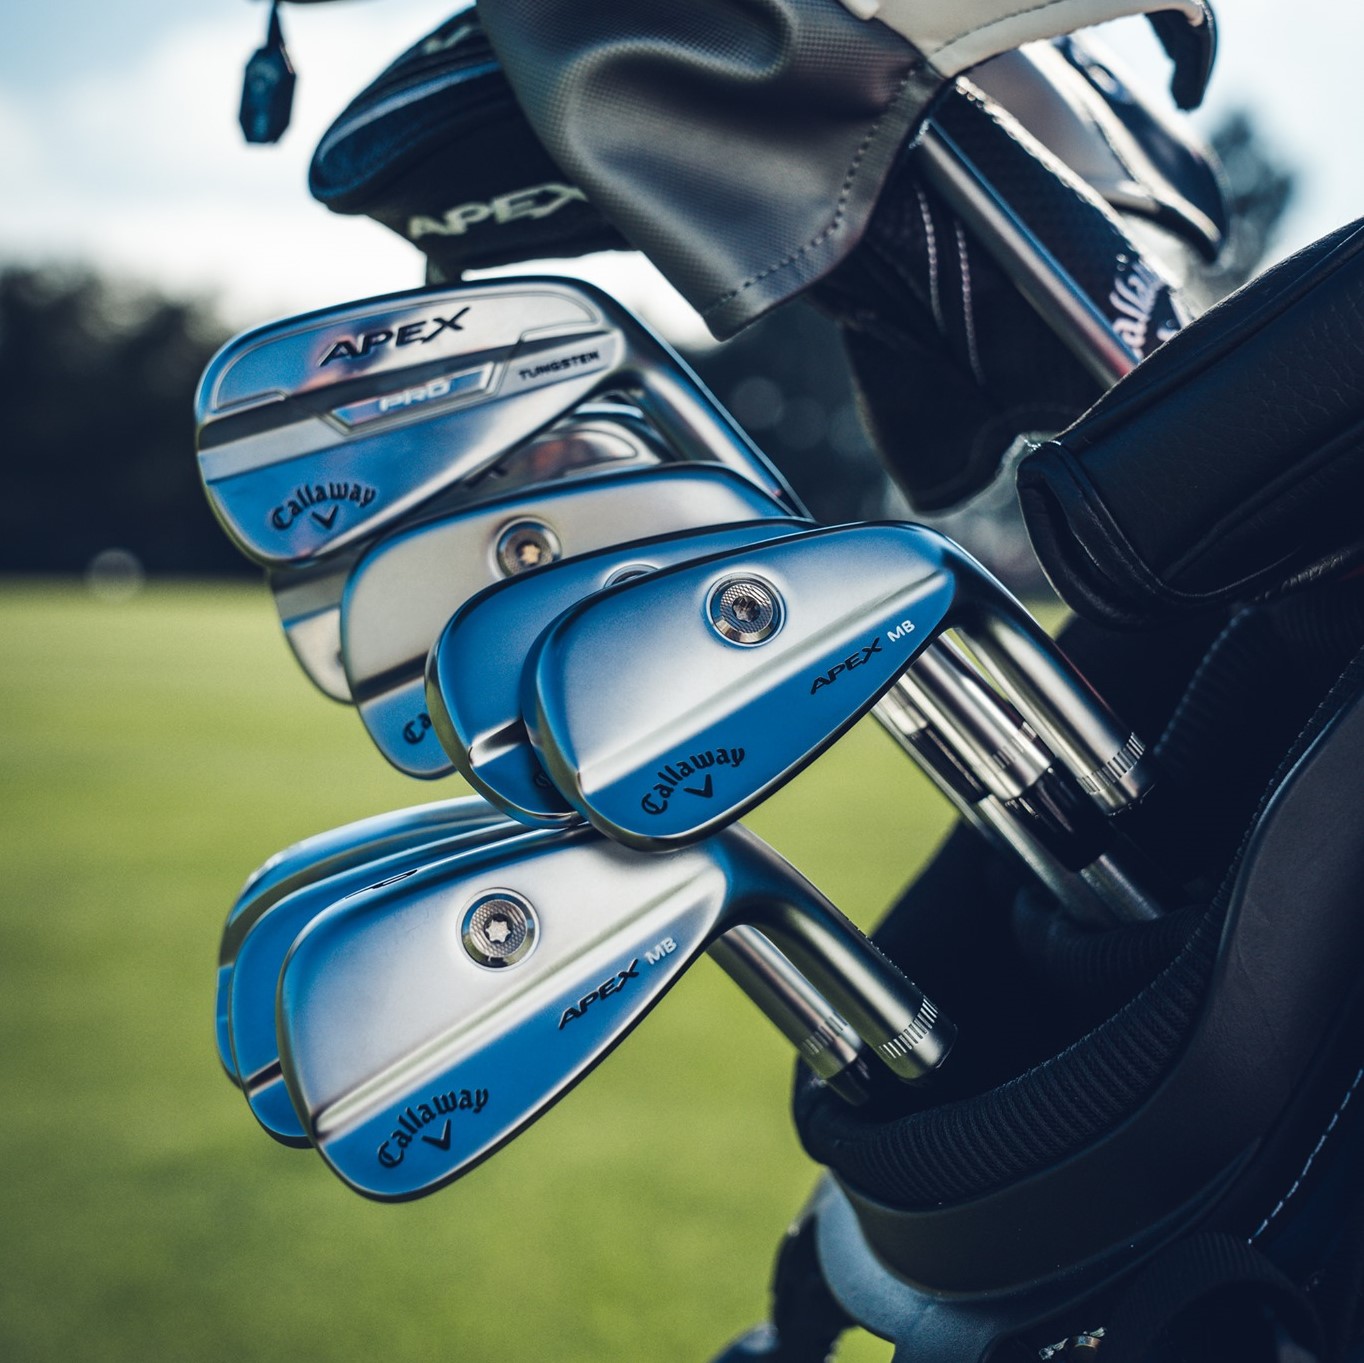 10 Best Golf Club Brands Must Read This Before Buying